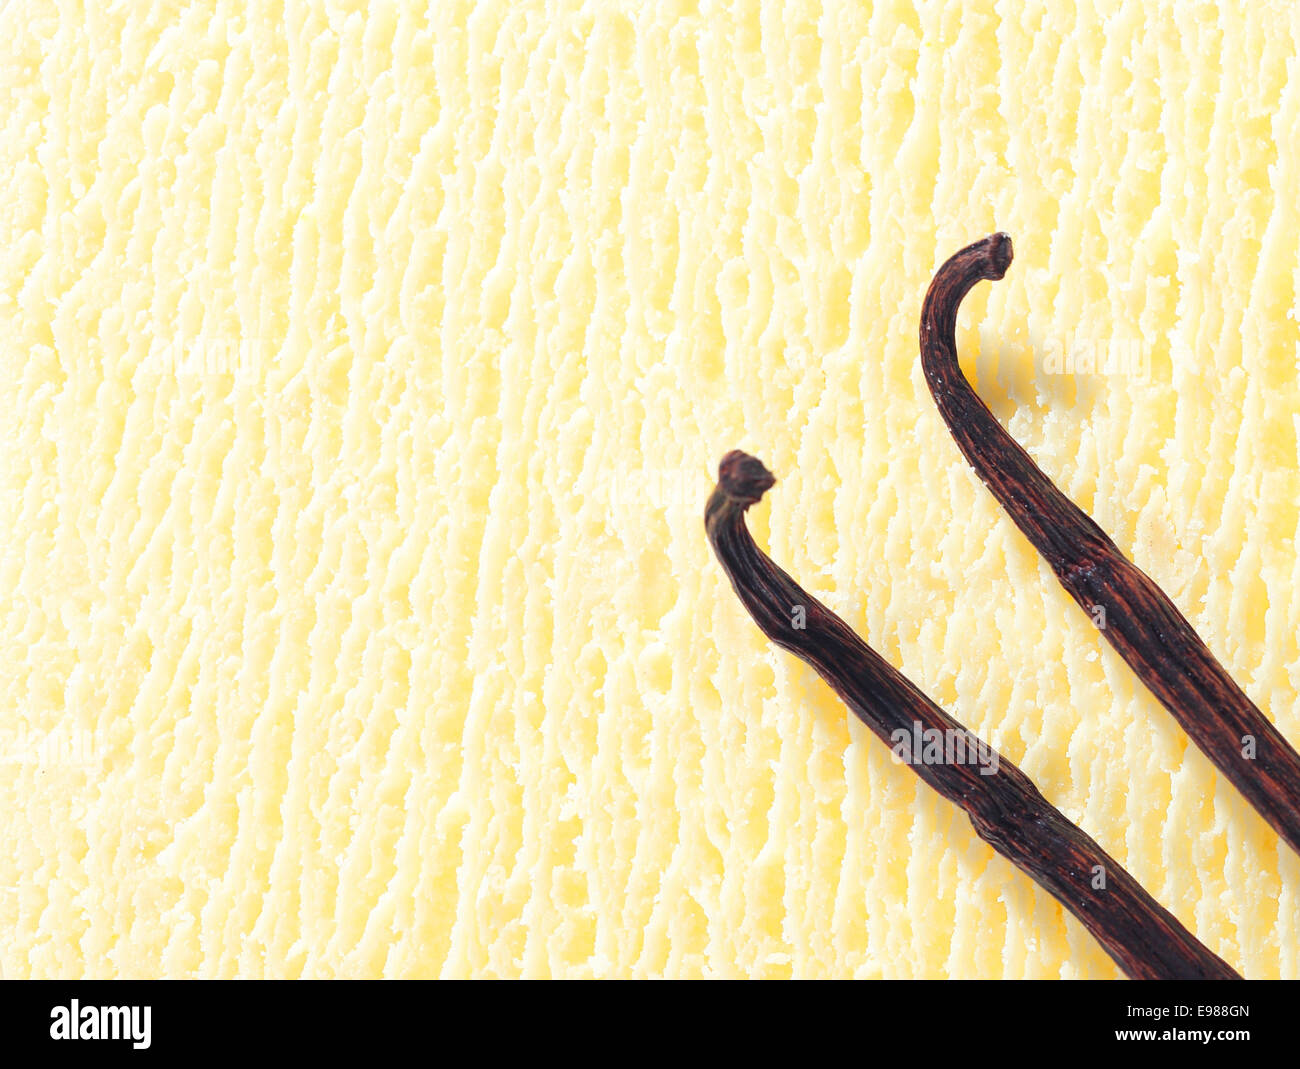 Closeup of a creamy icecream texture with two dried vanilla pods used as a flavouring during preparation Stock Photo